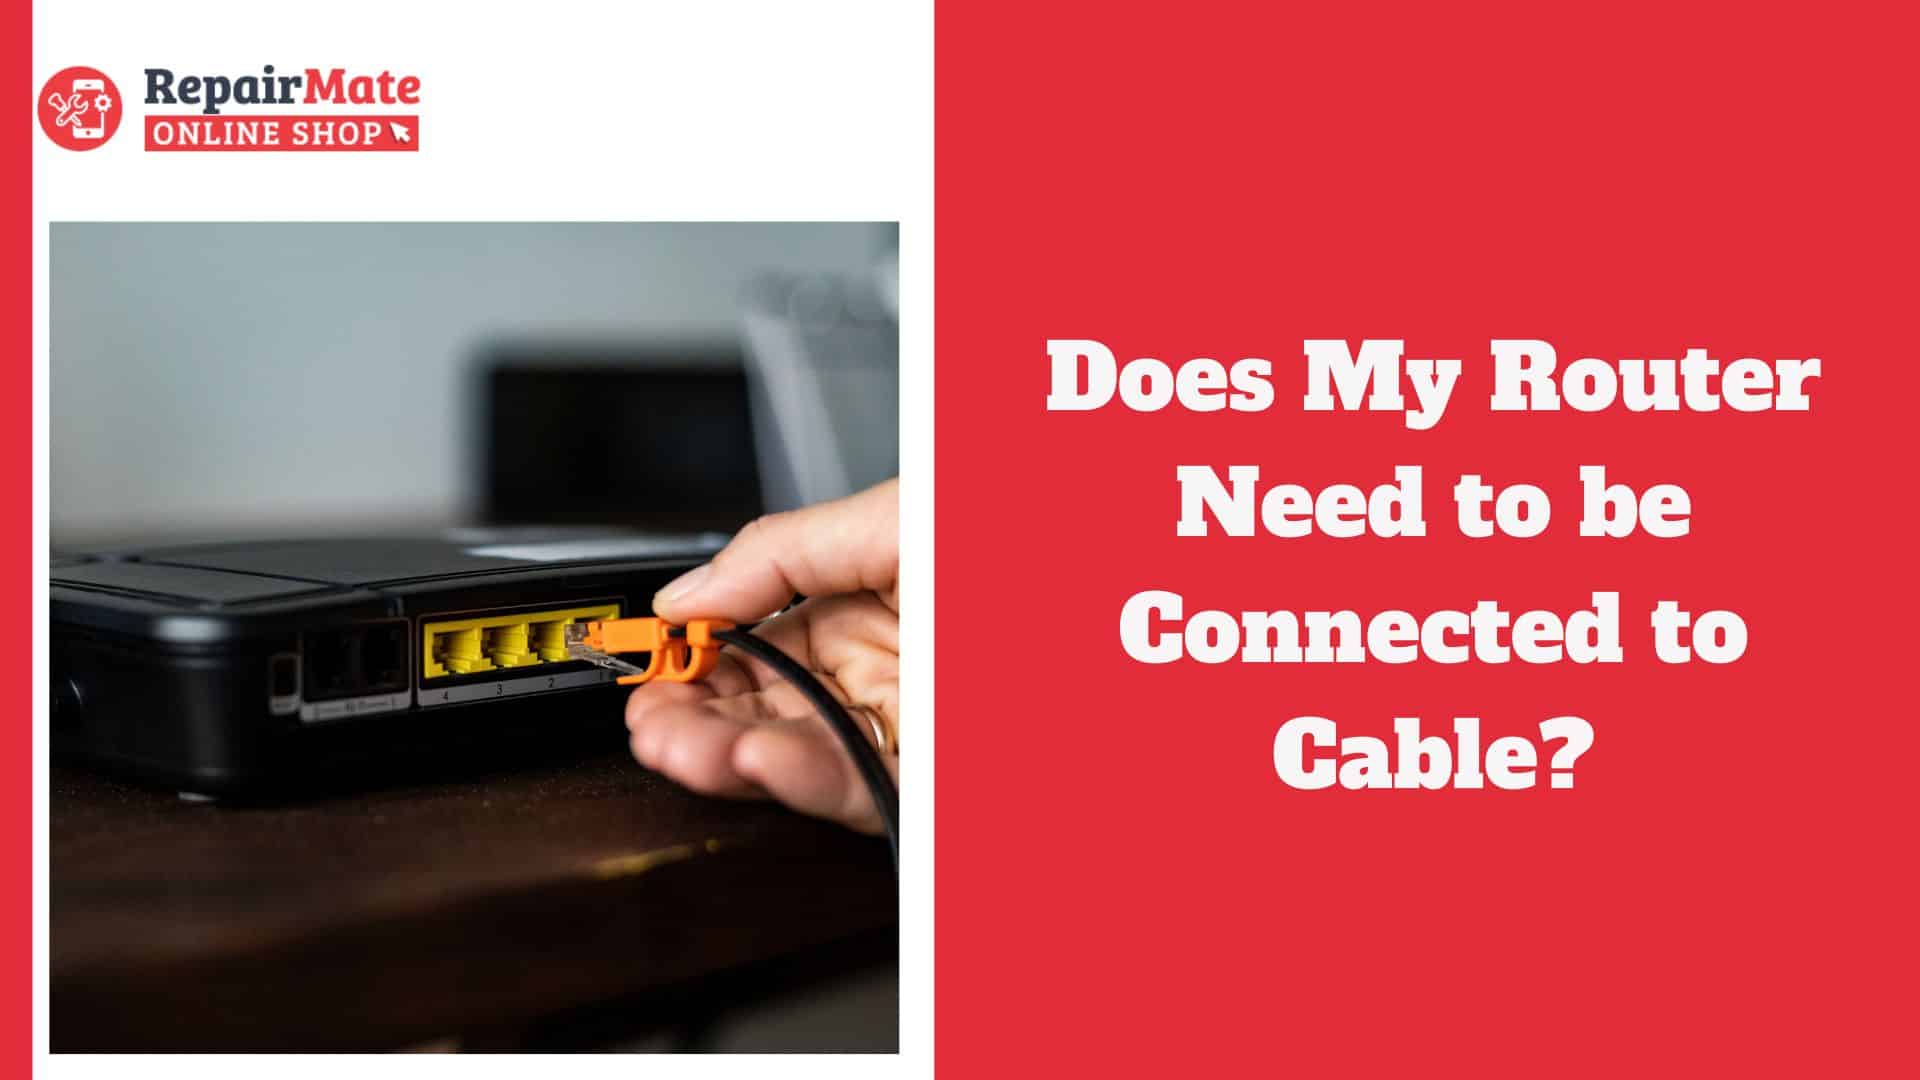 Does my Router Need to be Connected to Cable?